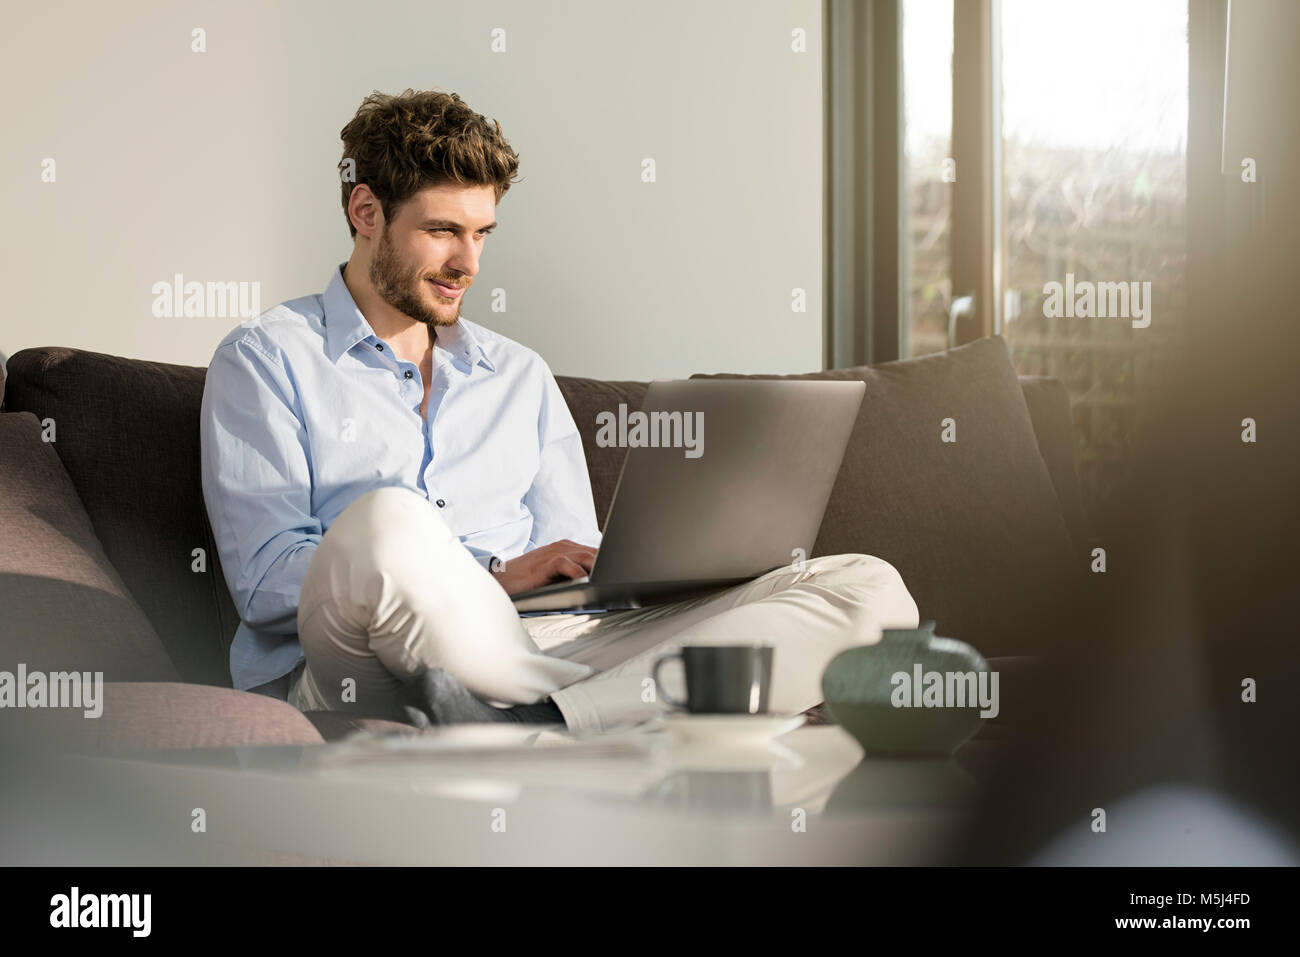 Man sitting on couch at home using laptop Stock Photo